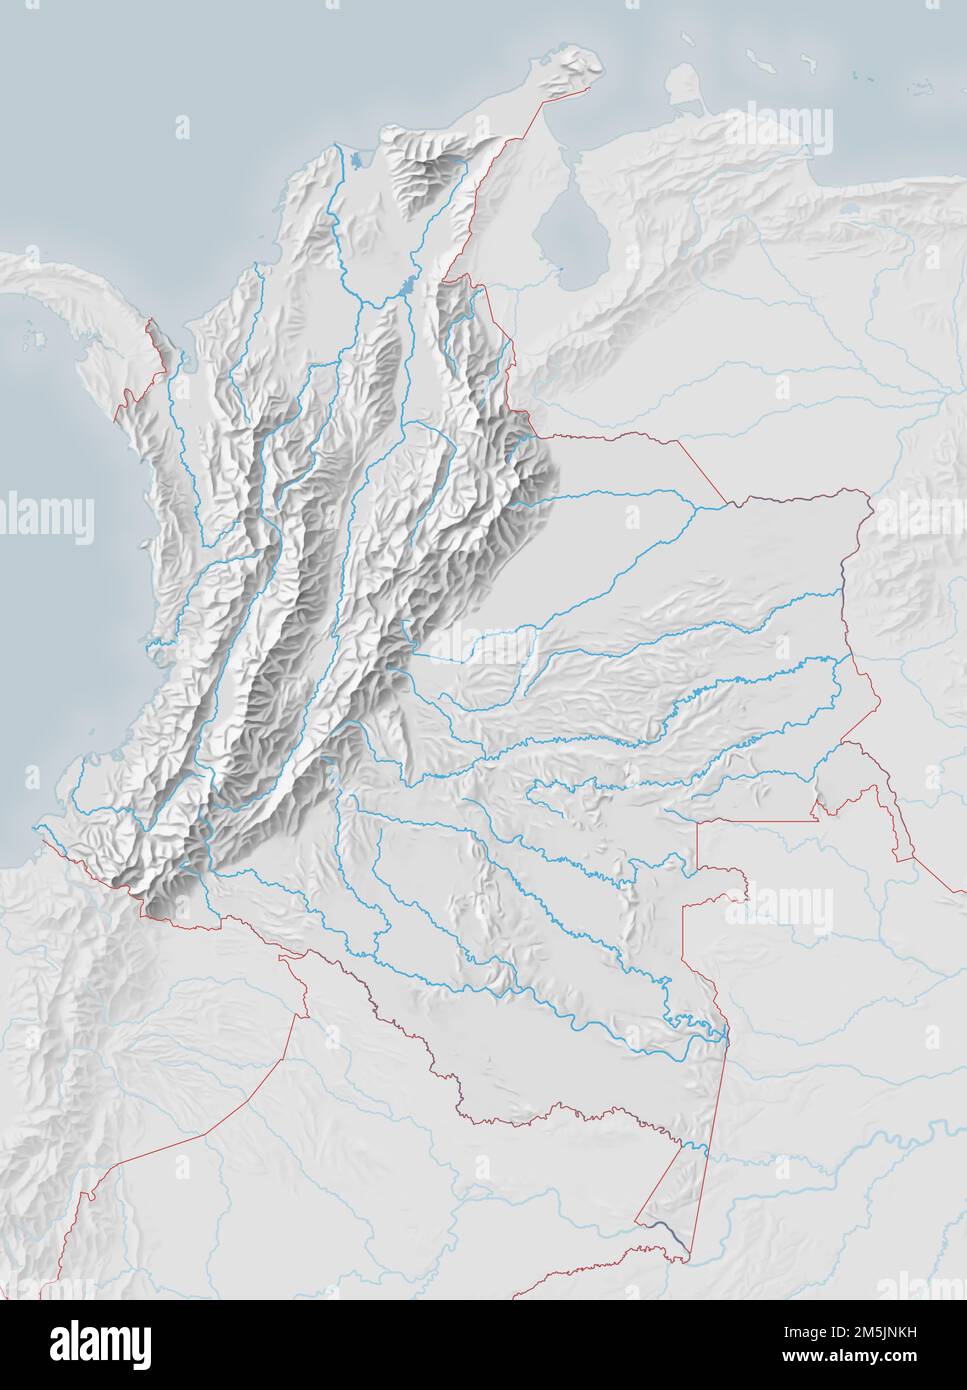 Topographic map of Colombia Stock Photo